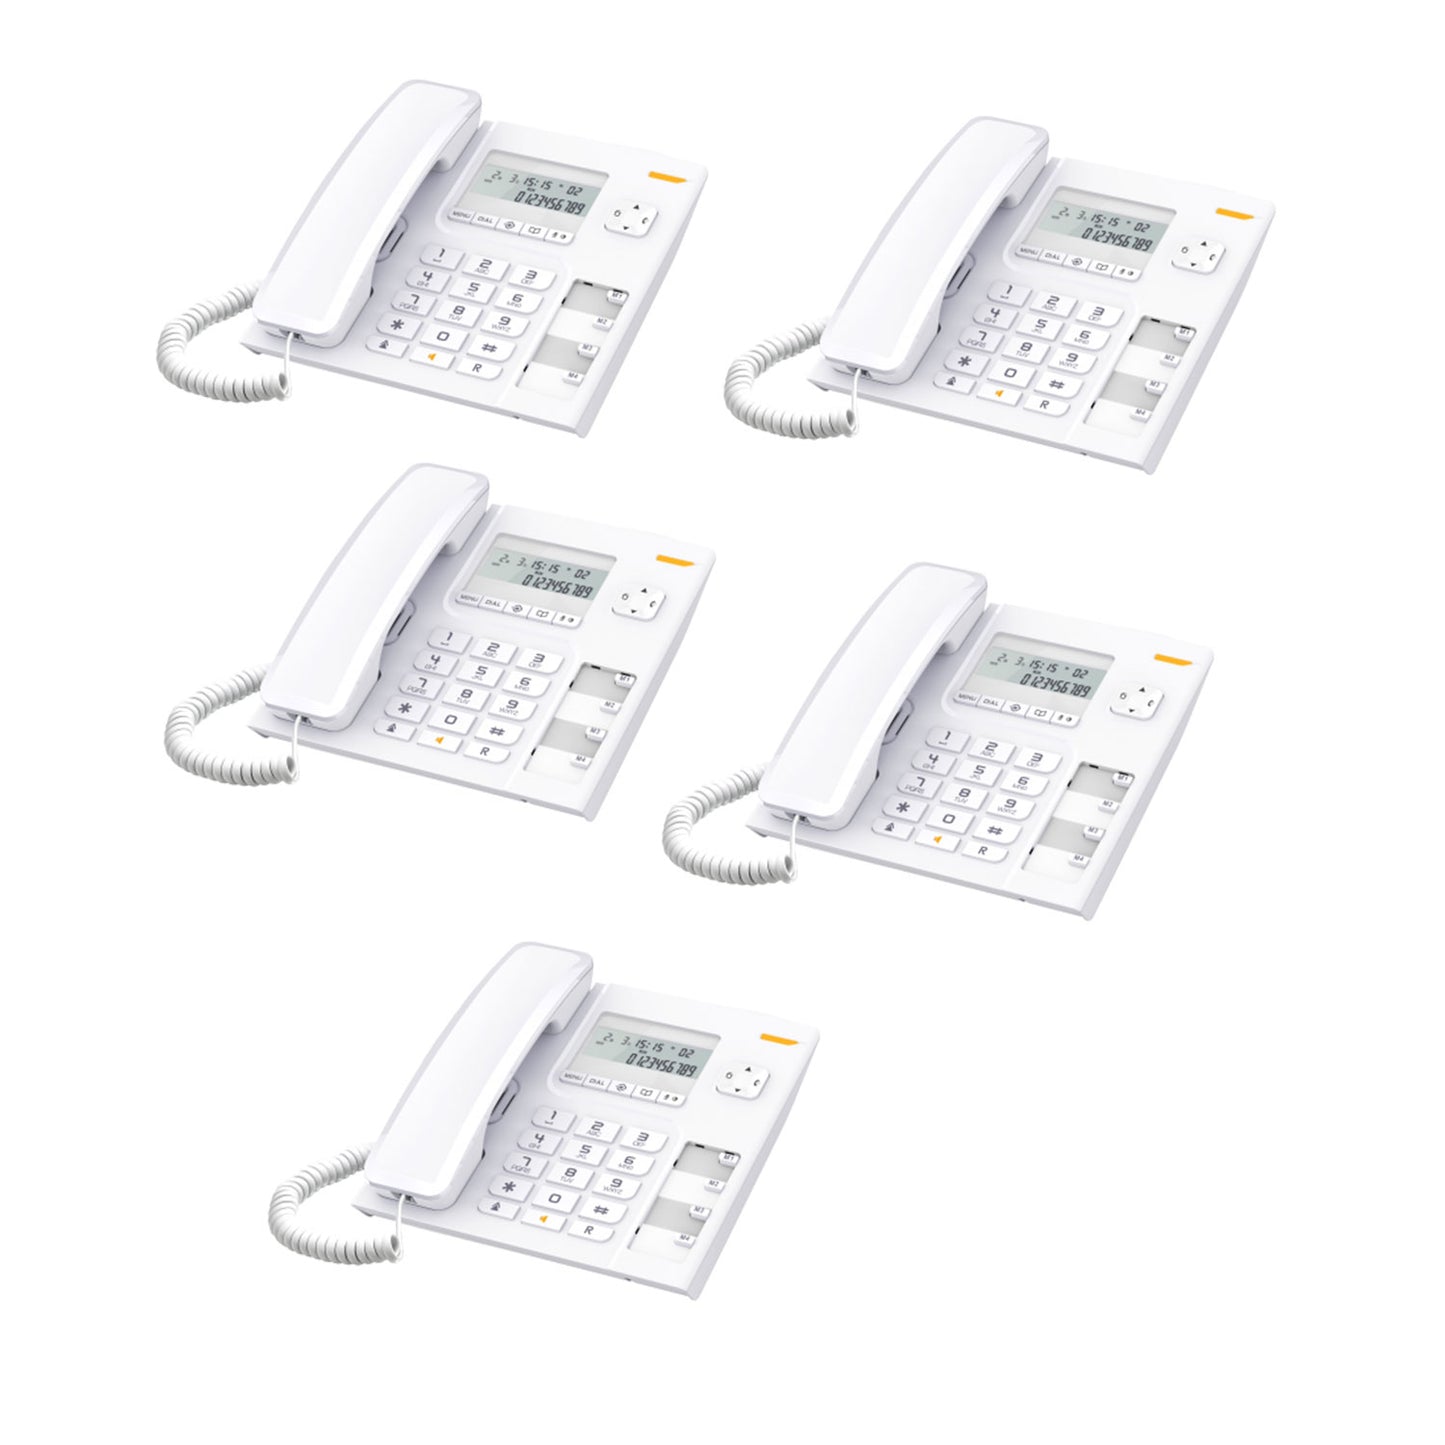 Alcatel T56 Corded Landline Phone With Caller Id And Handsfree White (Pack Of 5)